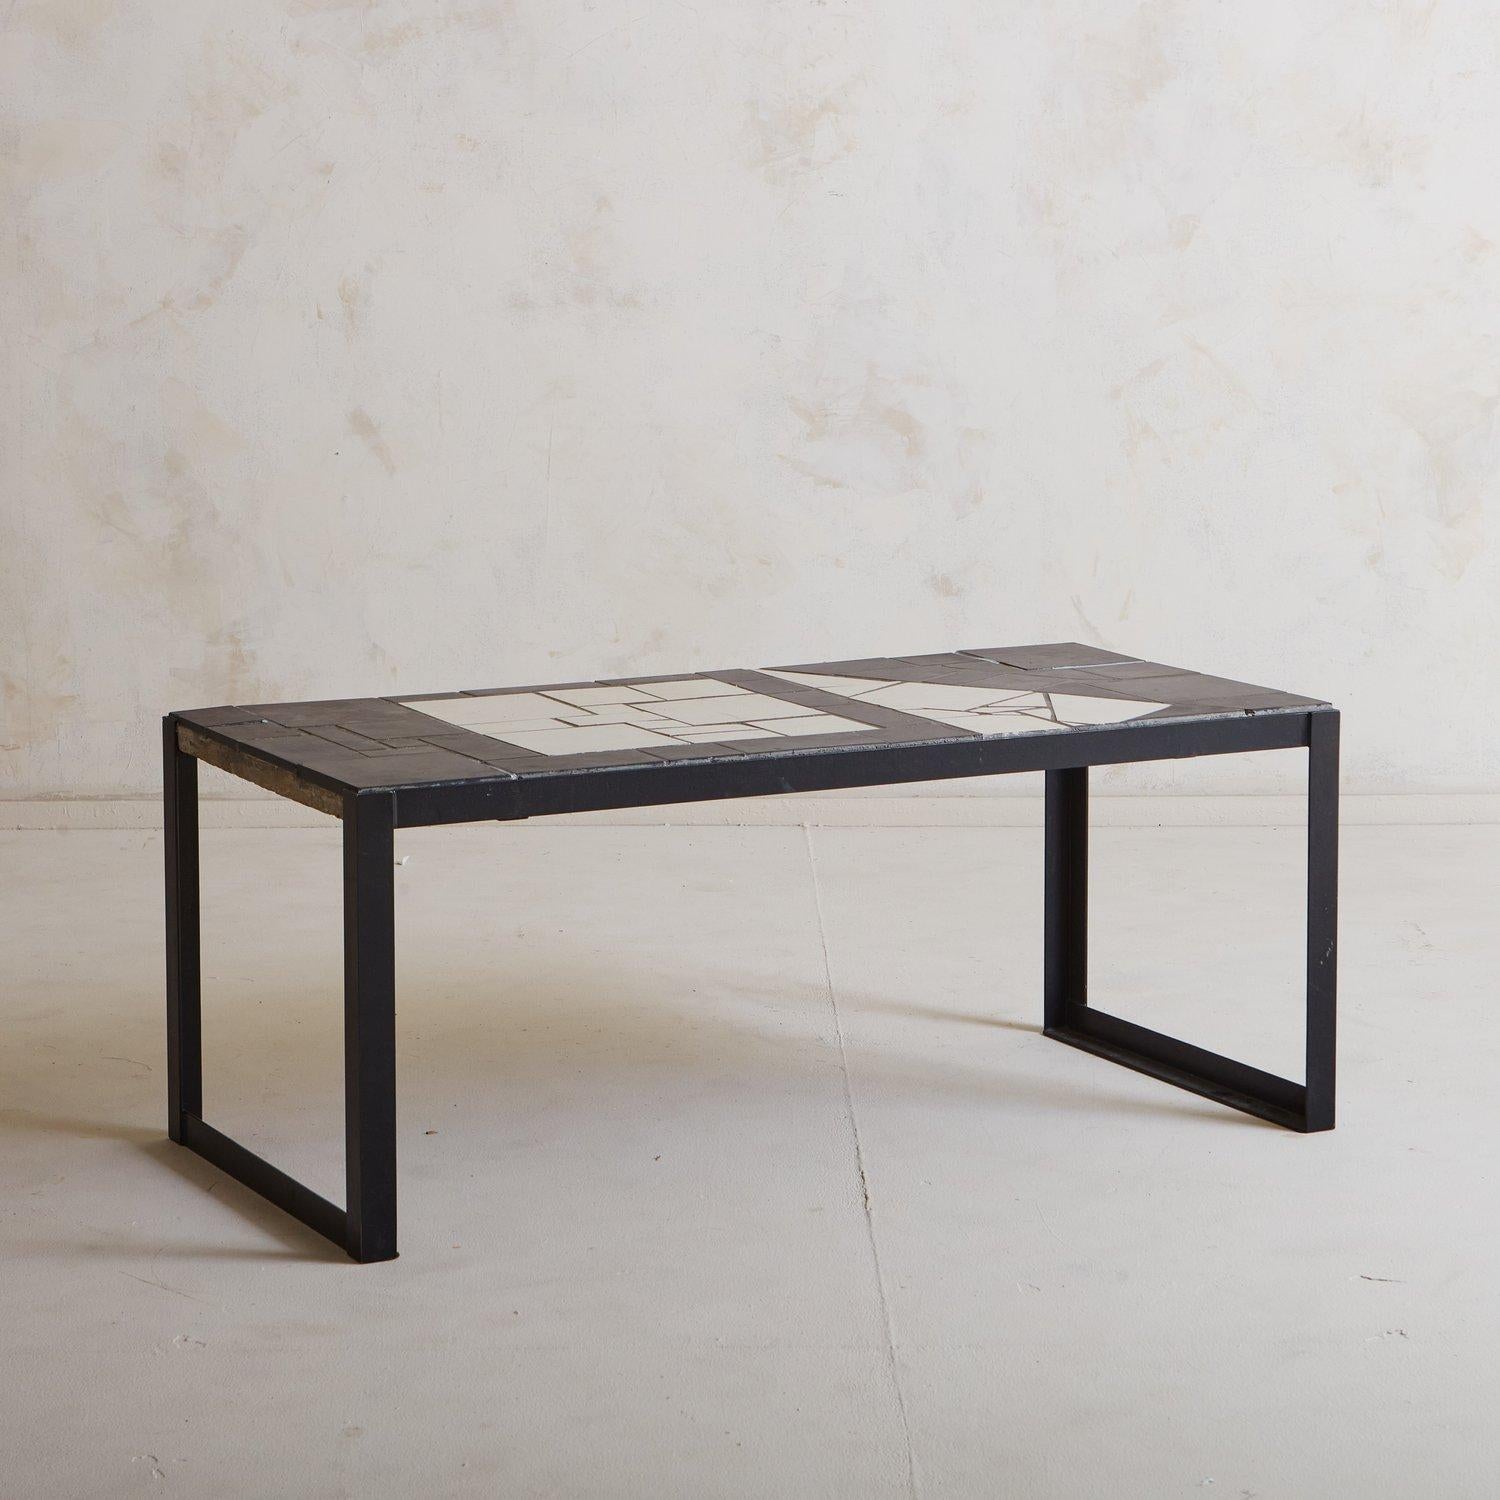 A vintage Swiss coffee table featuring an abstract black and white tiled top. This table stands on angular black metal legs. Sourced in France, 20th Century.

